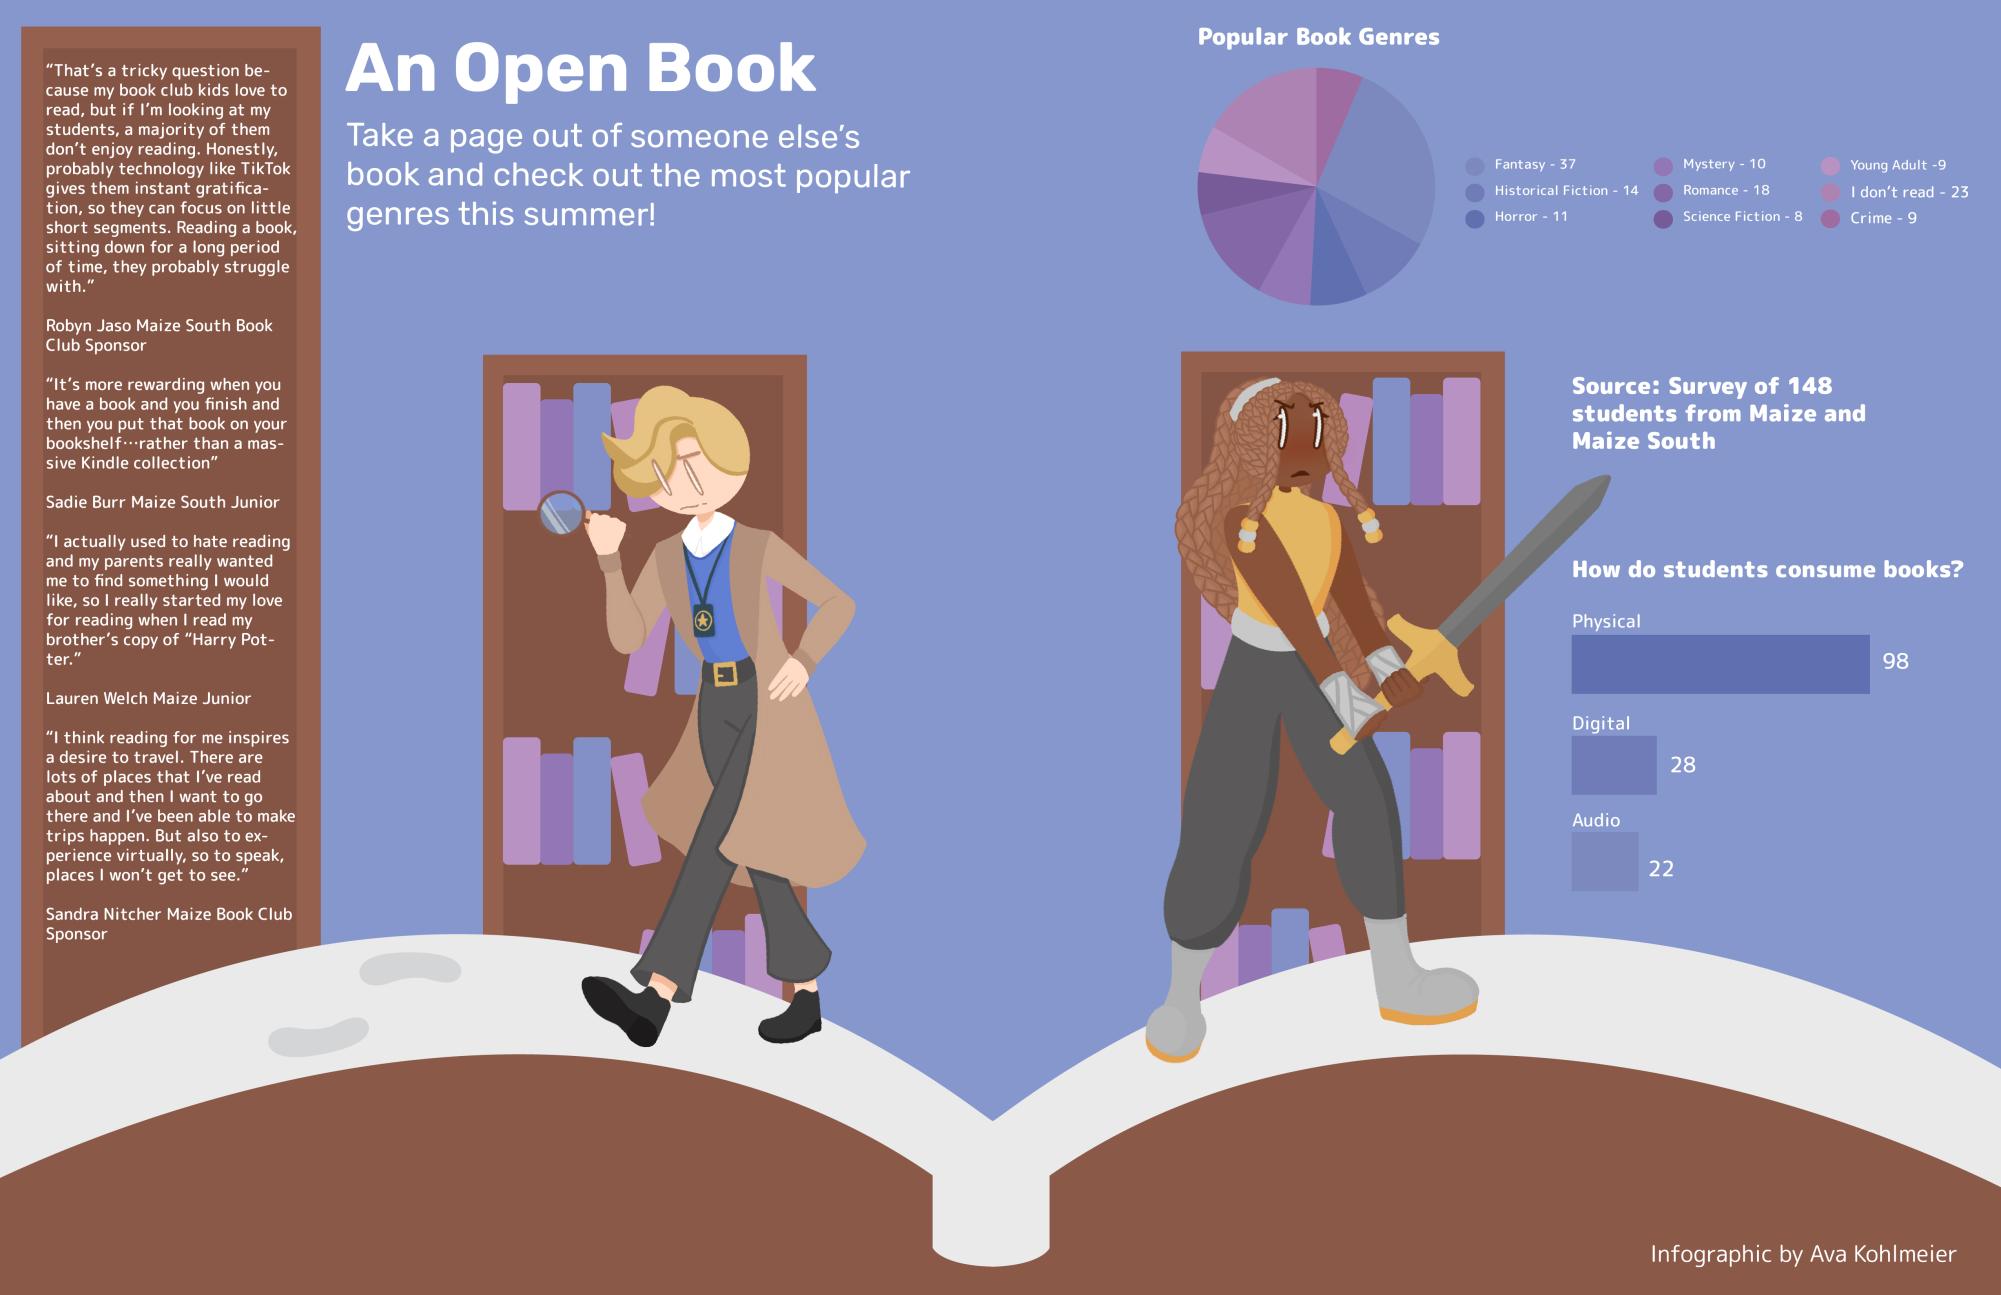 The image is an infographic with a quote on the left side of the image. The background contains bookshelves “That's a tricky question because my book club kids love to read, but if I'm looking at my students, a majority of them don't enjoy reading. Honestly, probably technology like TikTok gives them instant gratification, so they can focus on little short segments. Reading a book, sitting down for a long period of time, they probably struggle with.” Robyn Jaso Maize South Book Club Sponsor “It's more rewarding when you have a book and you finish and then you put that book on your bookshelf…rather than a massive Kindle collection” Sadie Burr Maize South Junior “I actually used to hate reading and my parents really wanted me to find something I would like, so I really started my love for reading when I read my brother's copy of “Harry Potter.” Lauren Welch Maize Junior “I think reading for me inspires a desire to travel. There are lots of places that I’ve read about and then I want to go there and I’ve been able to make trips happen. But also to experience virtually, so to speak, places I won’t get to see.” Sandra Nitcher Maize Book Club Sponsor 